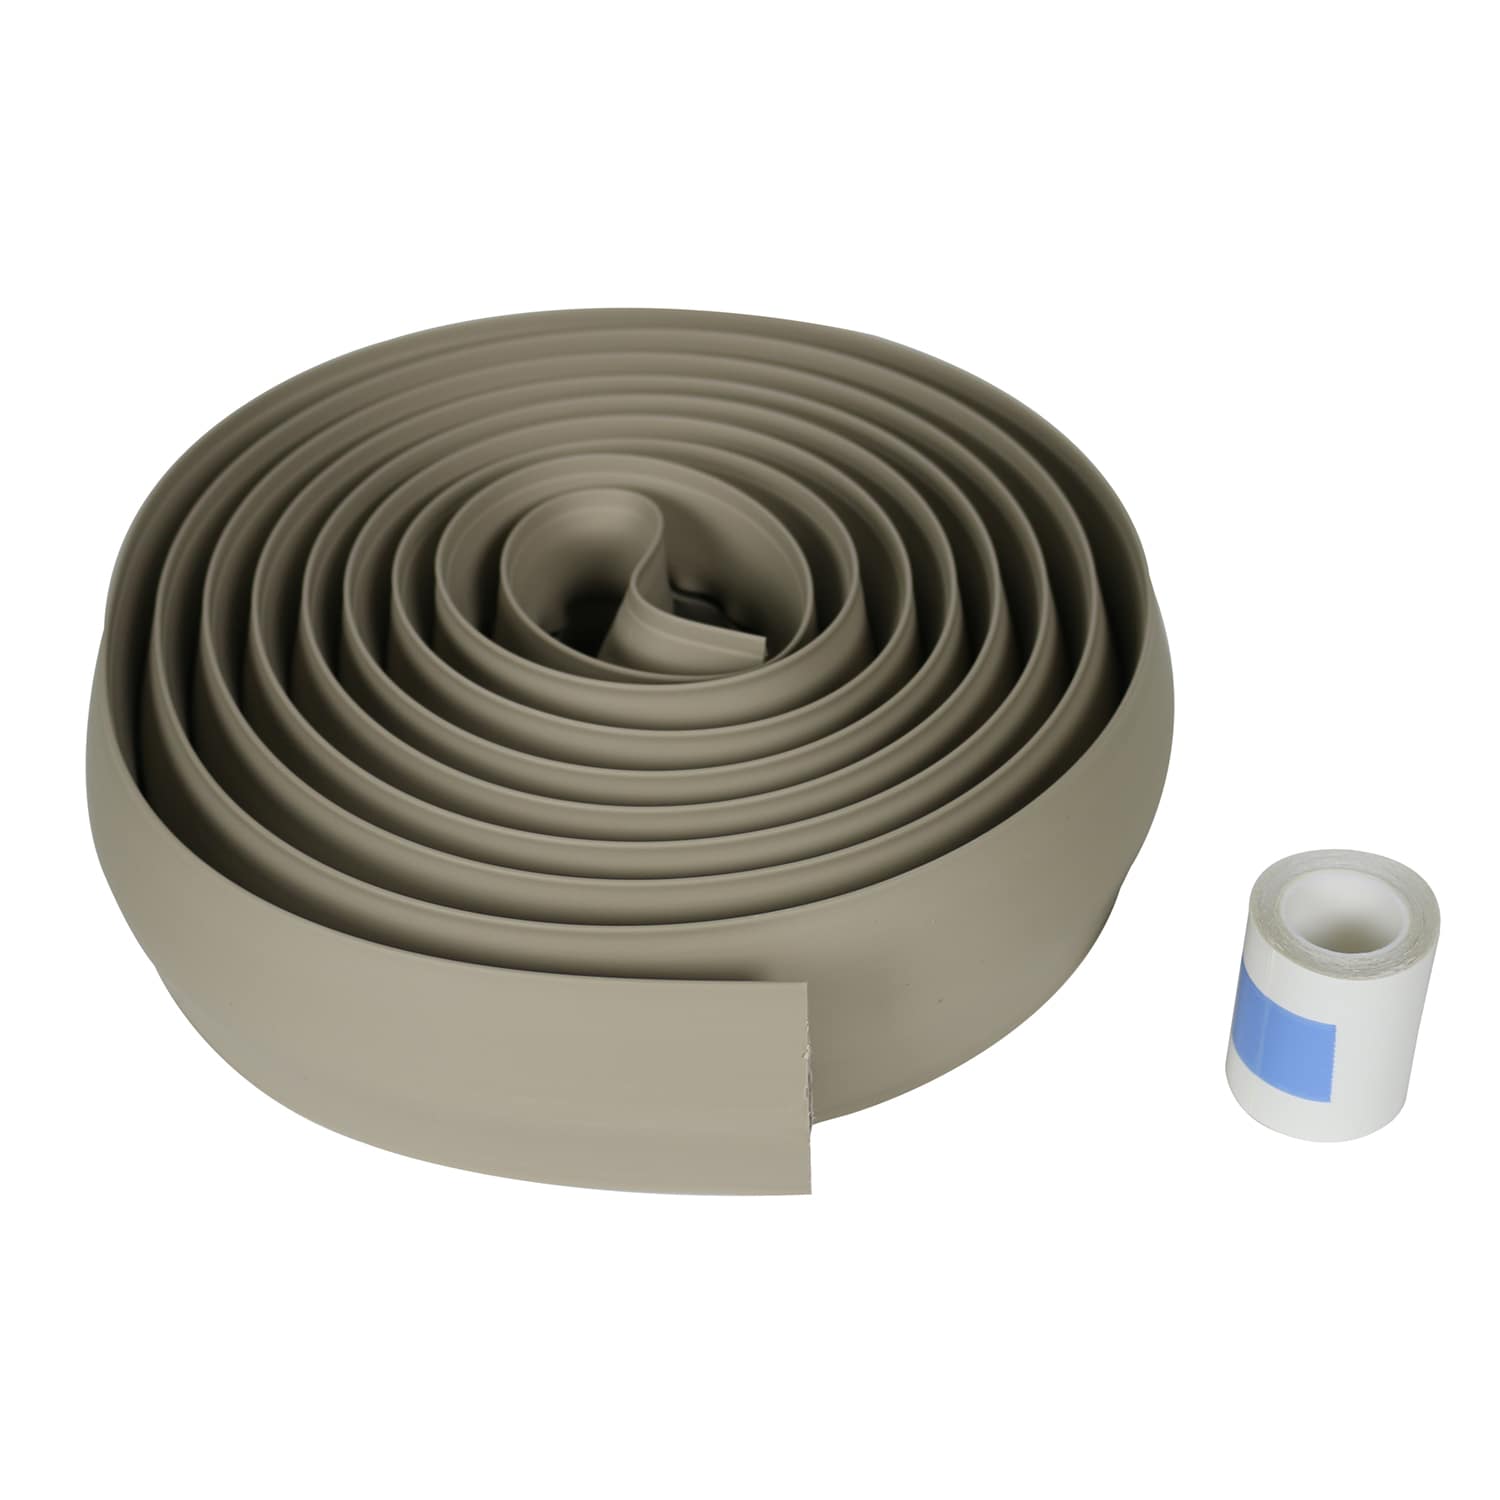 Source Floor cord cover silicone baseboard cord protector for corners  overfloor cord protector on m.